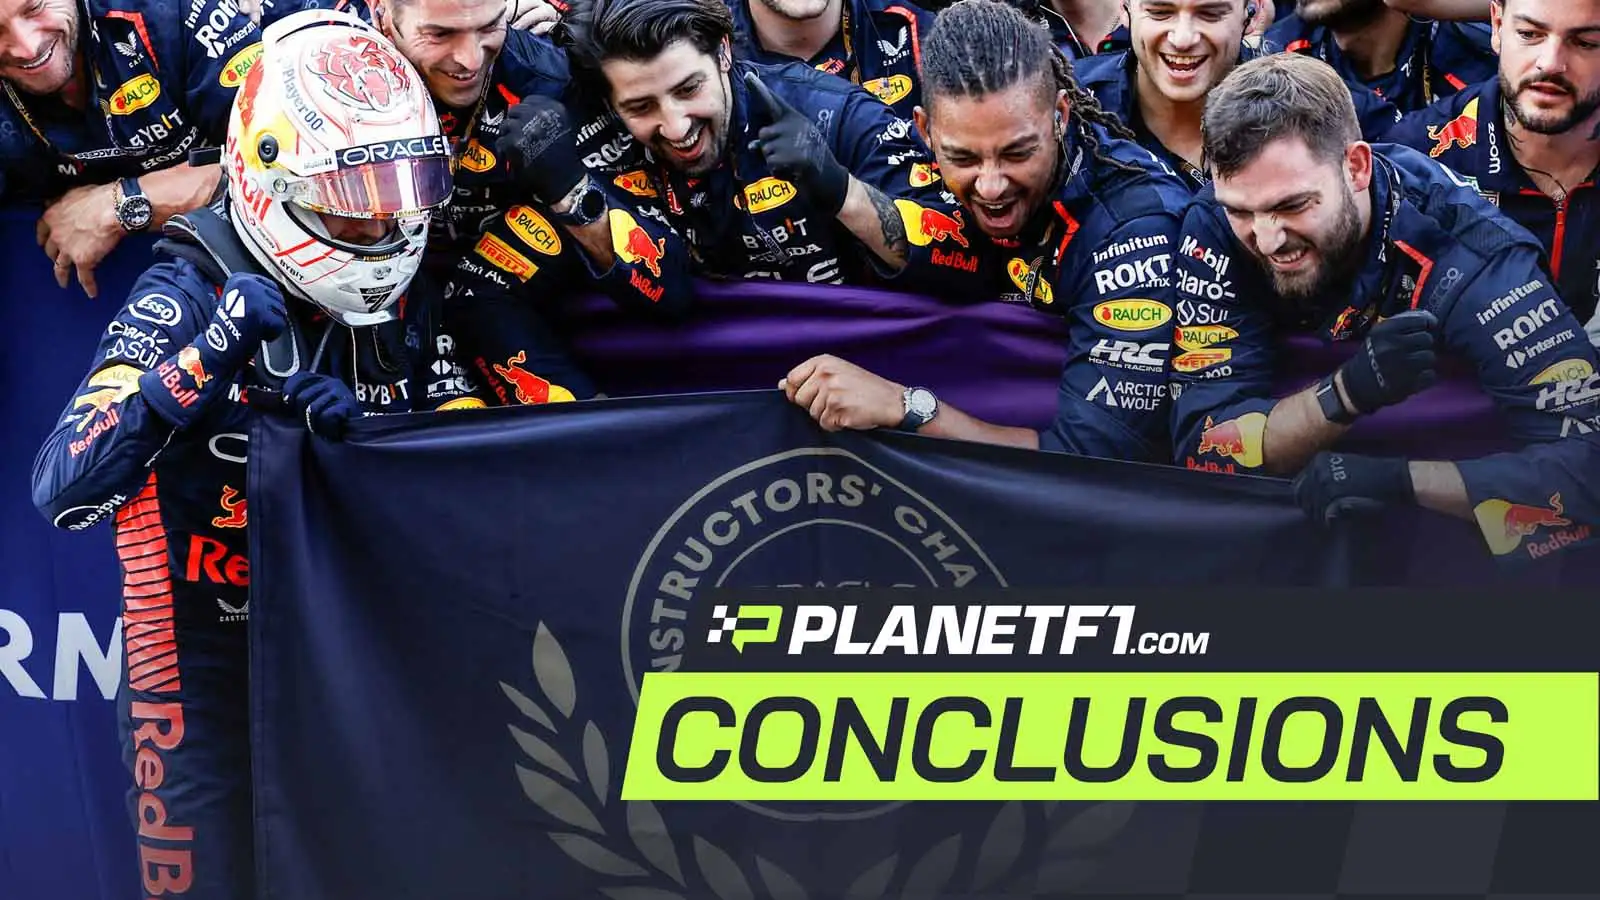 Red Bull celebrate Constructors glory at the Japanese Grand Prix.